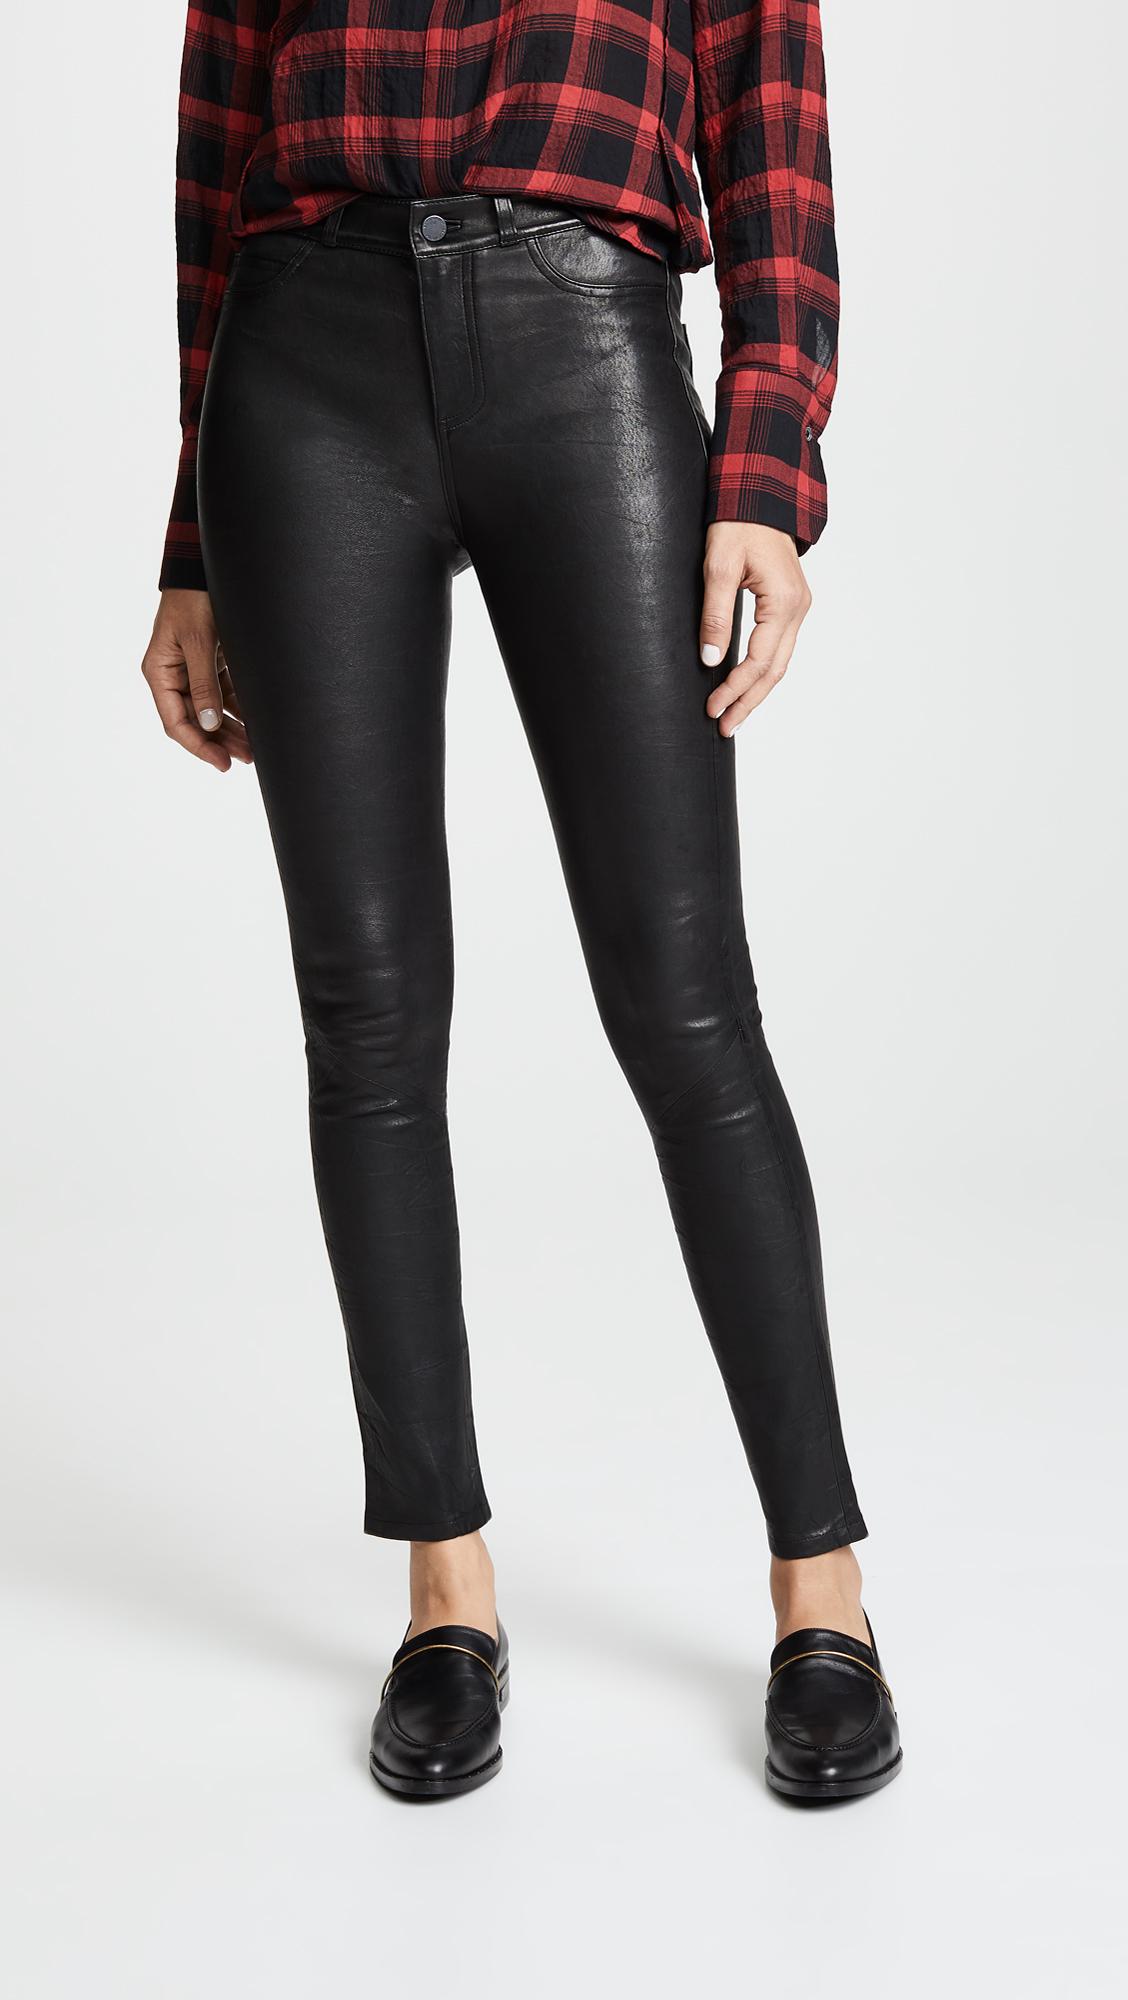 PAIGE Hoxton Stretch Leather Pants in Black